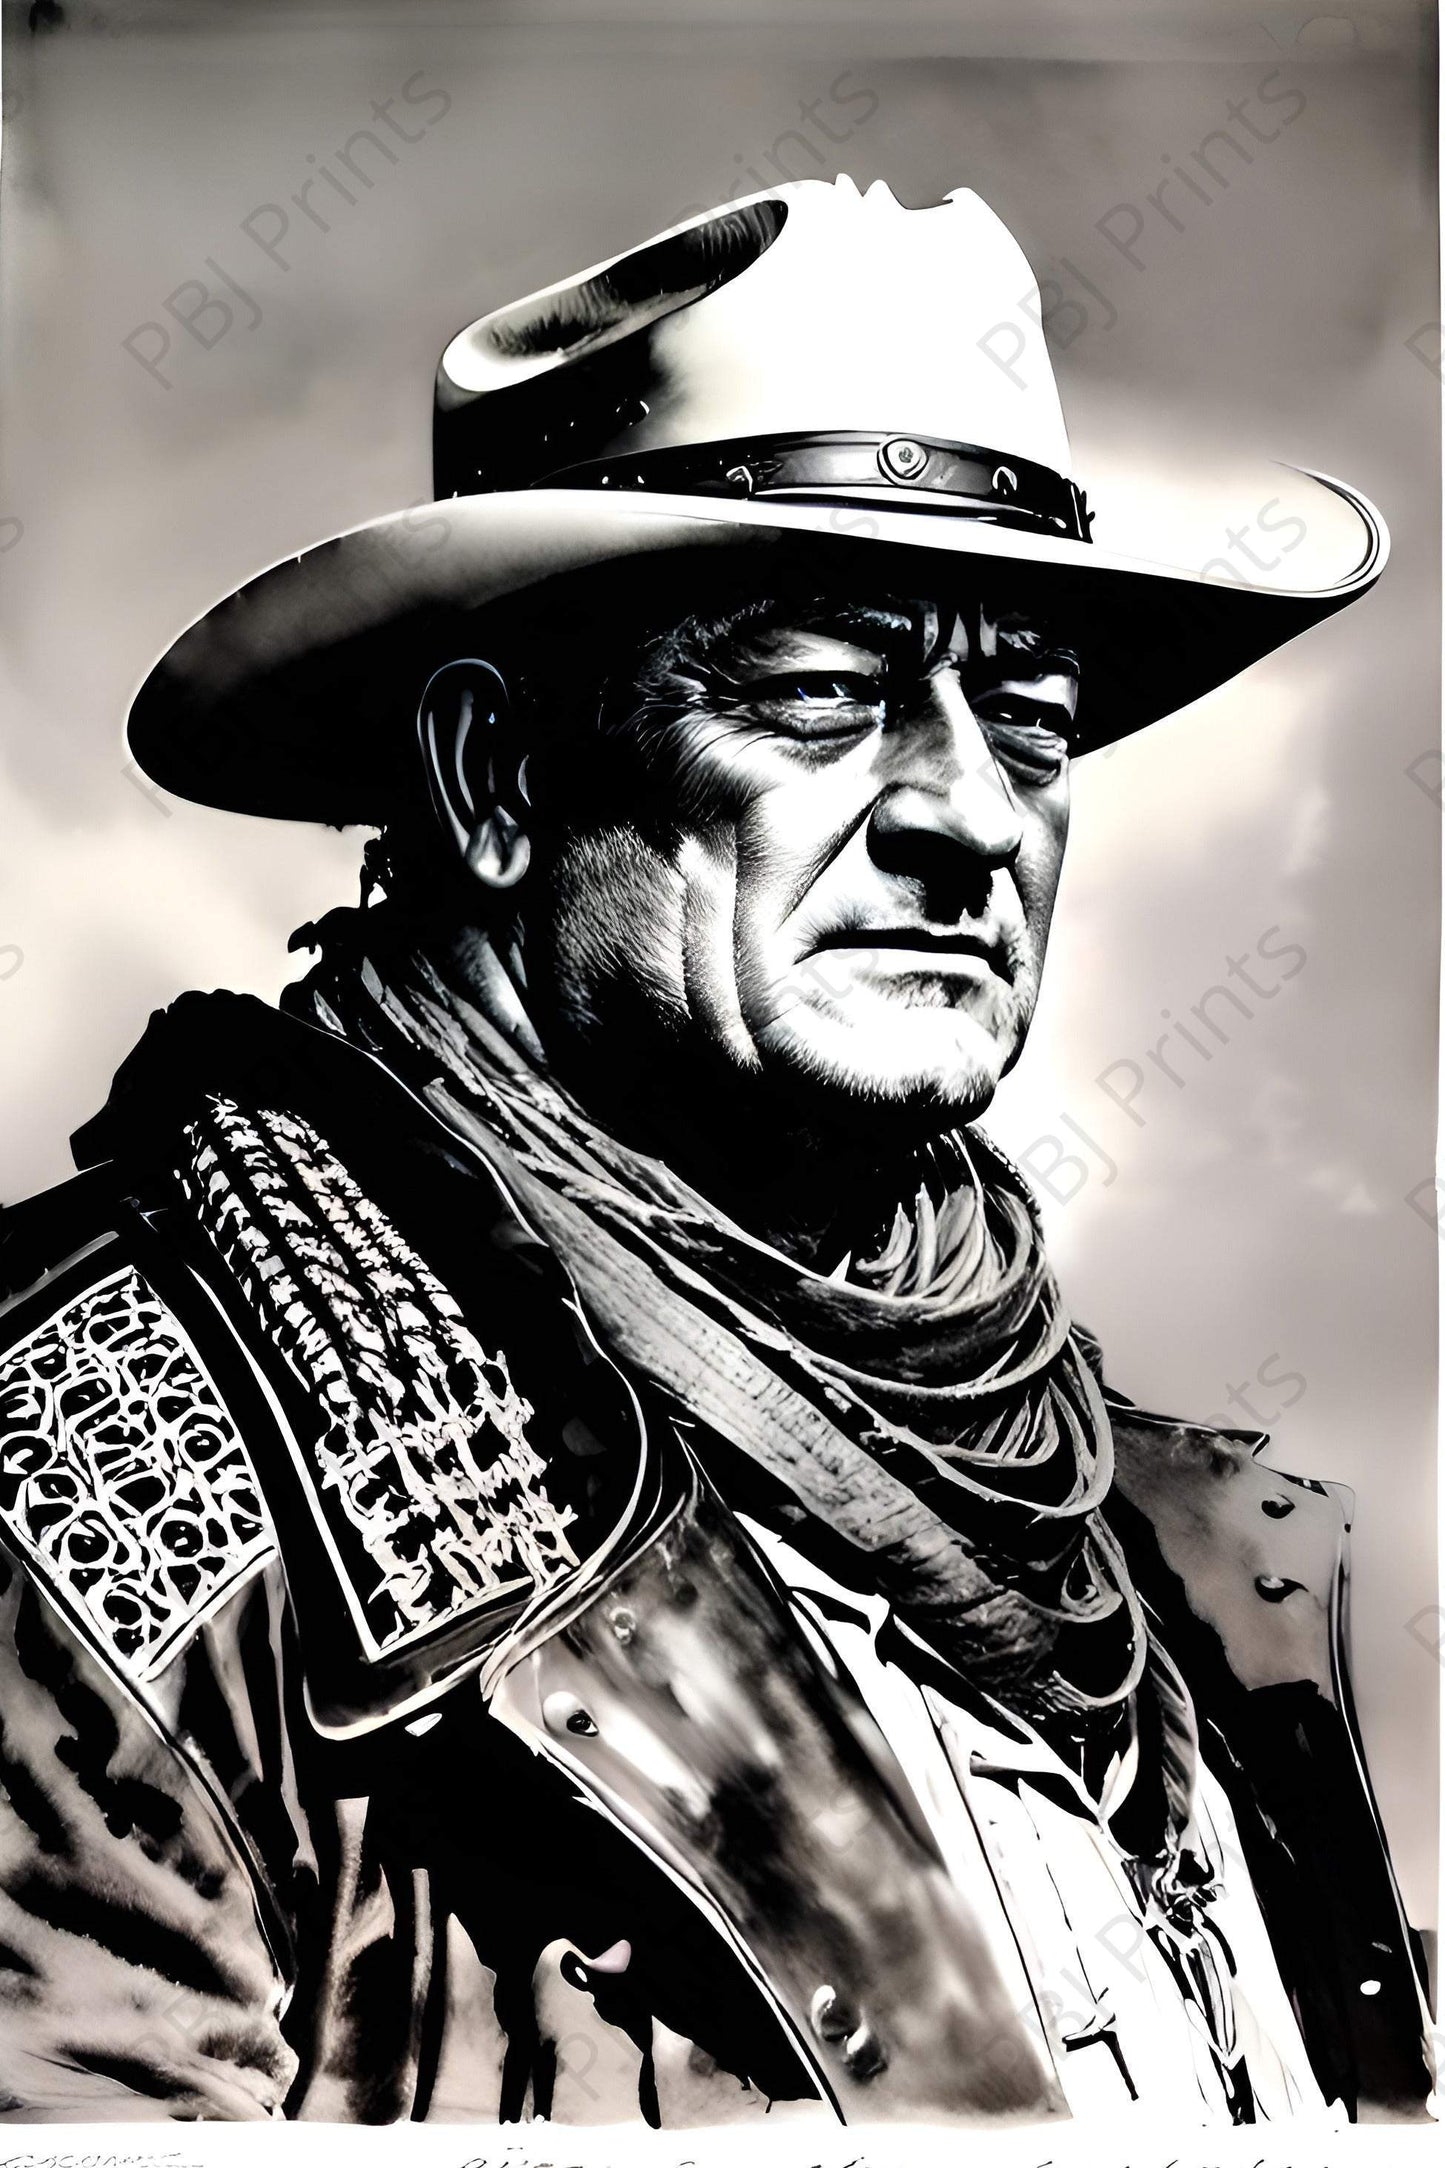 The Duke - Artist by anonymousprints - 